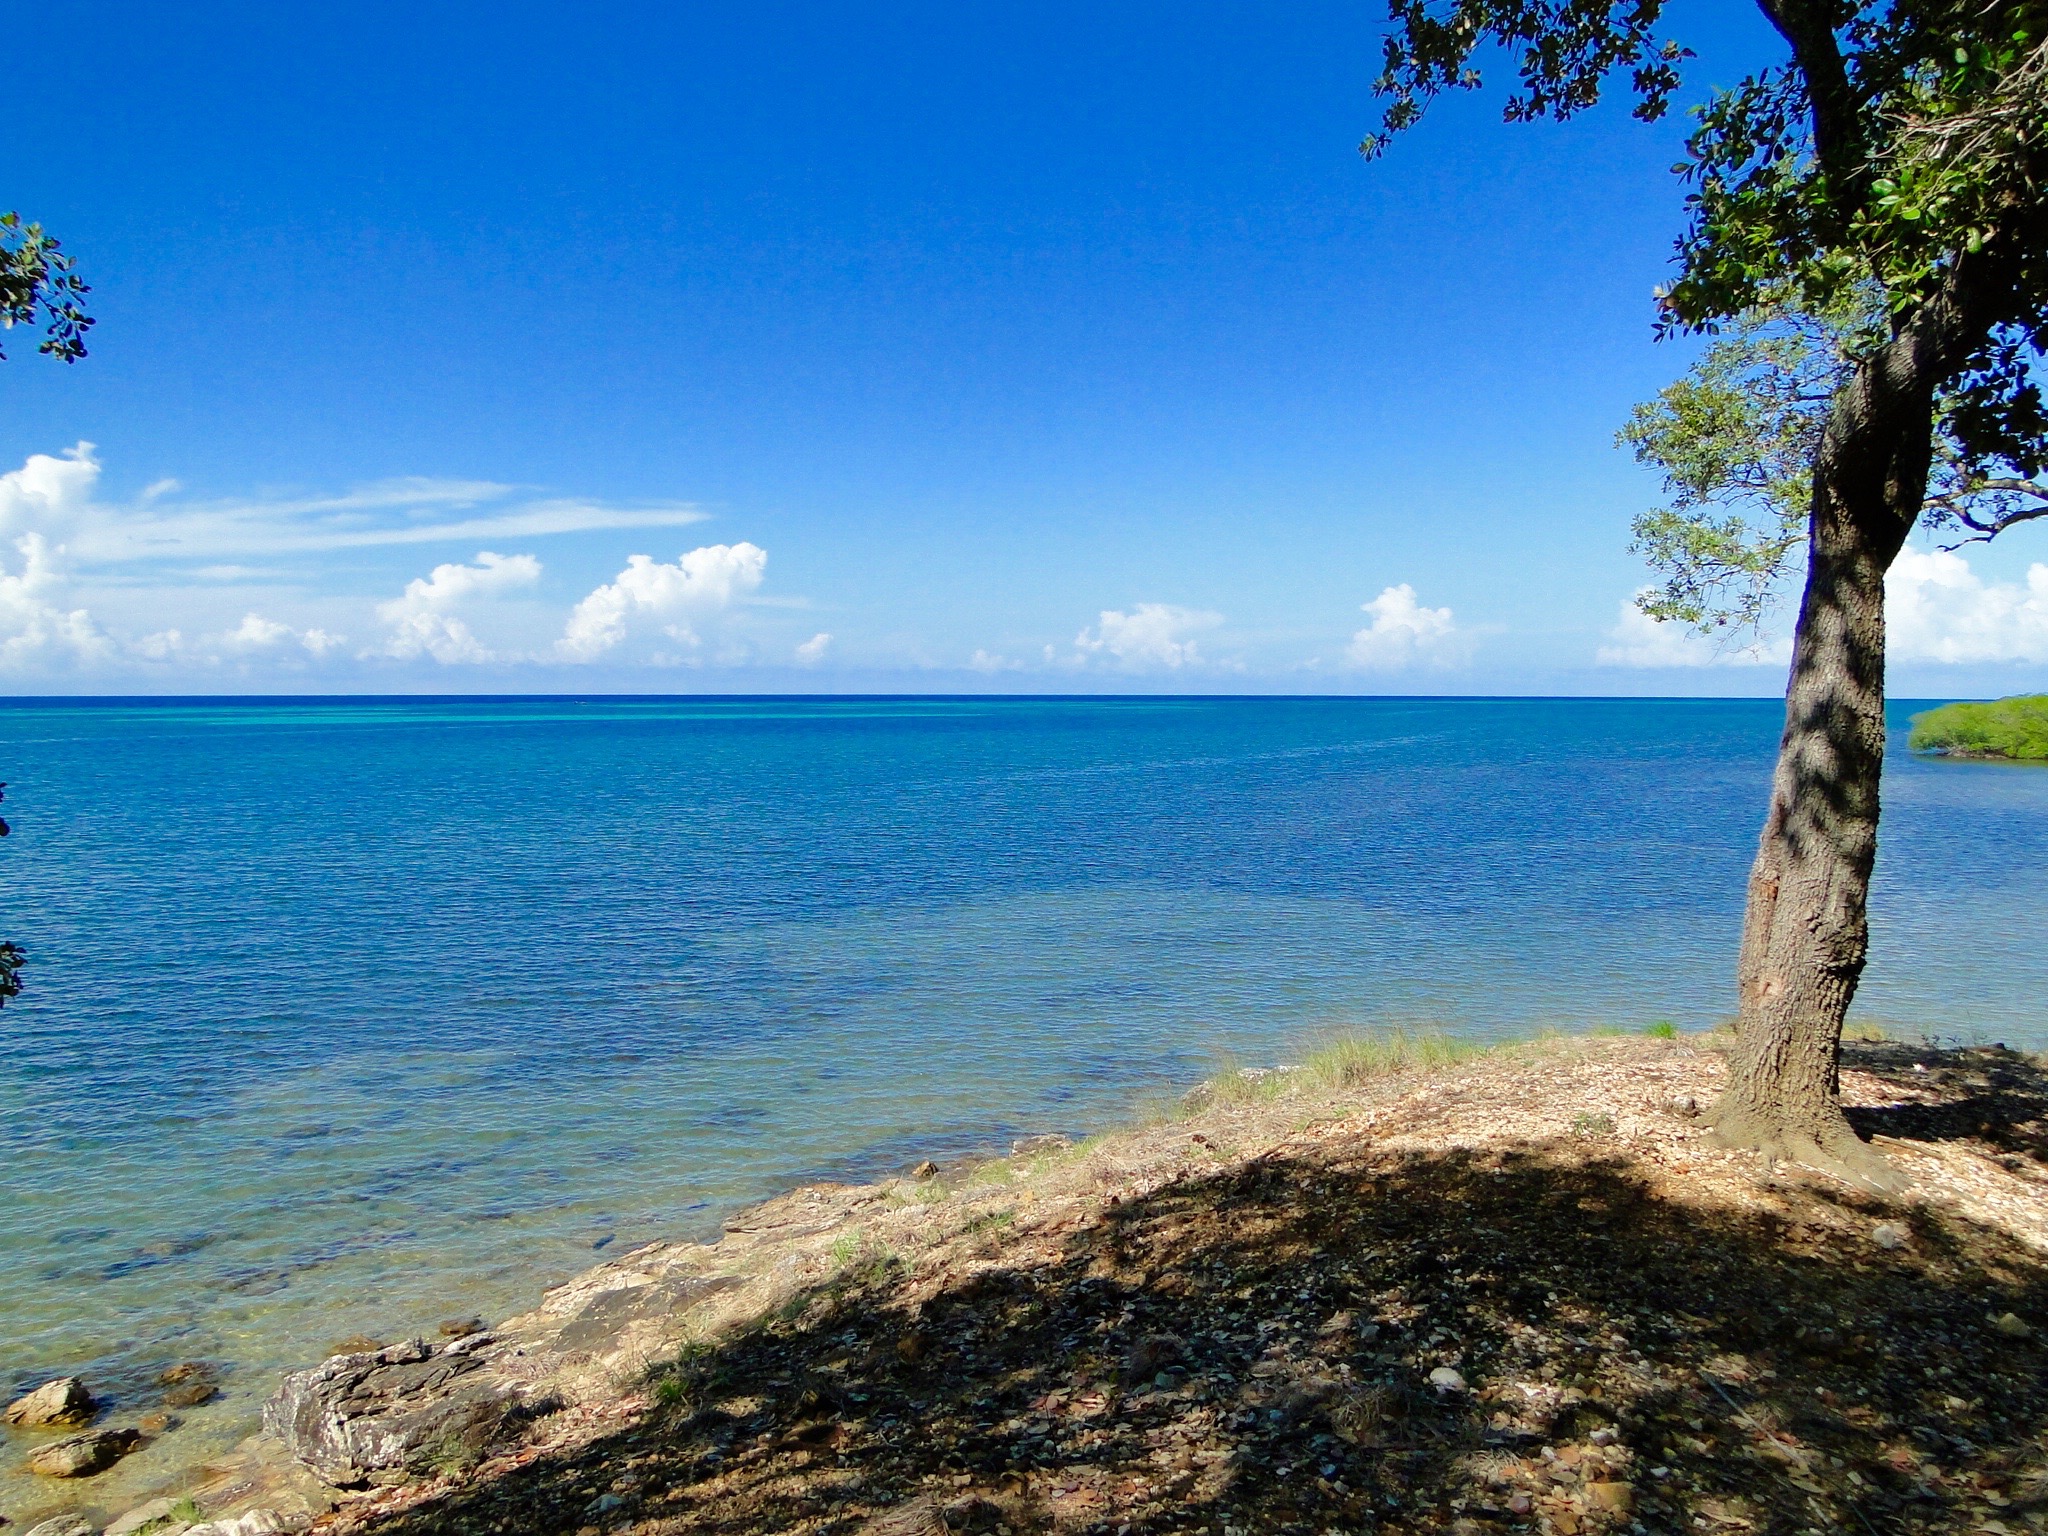 80 Acres With 2000 Foot Sand Beach Near Pristine Bay And The Black Pearl Golf Course - Roatan ...